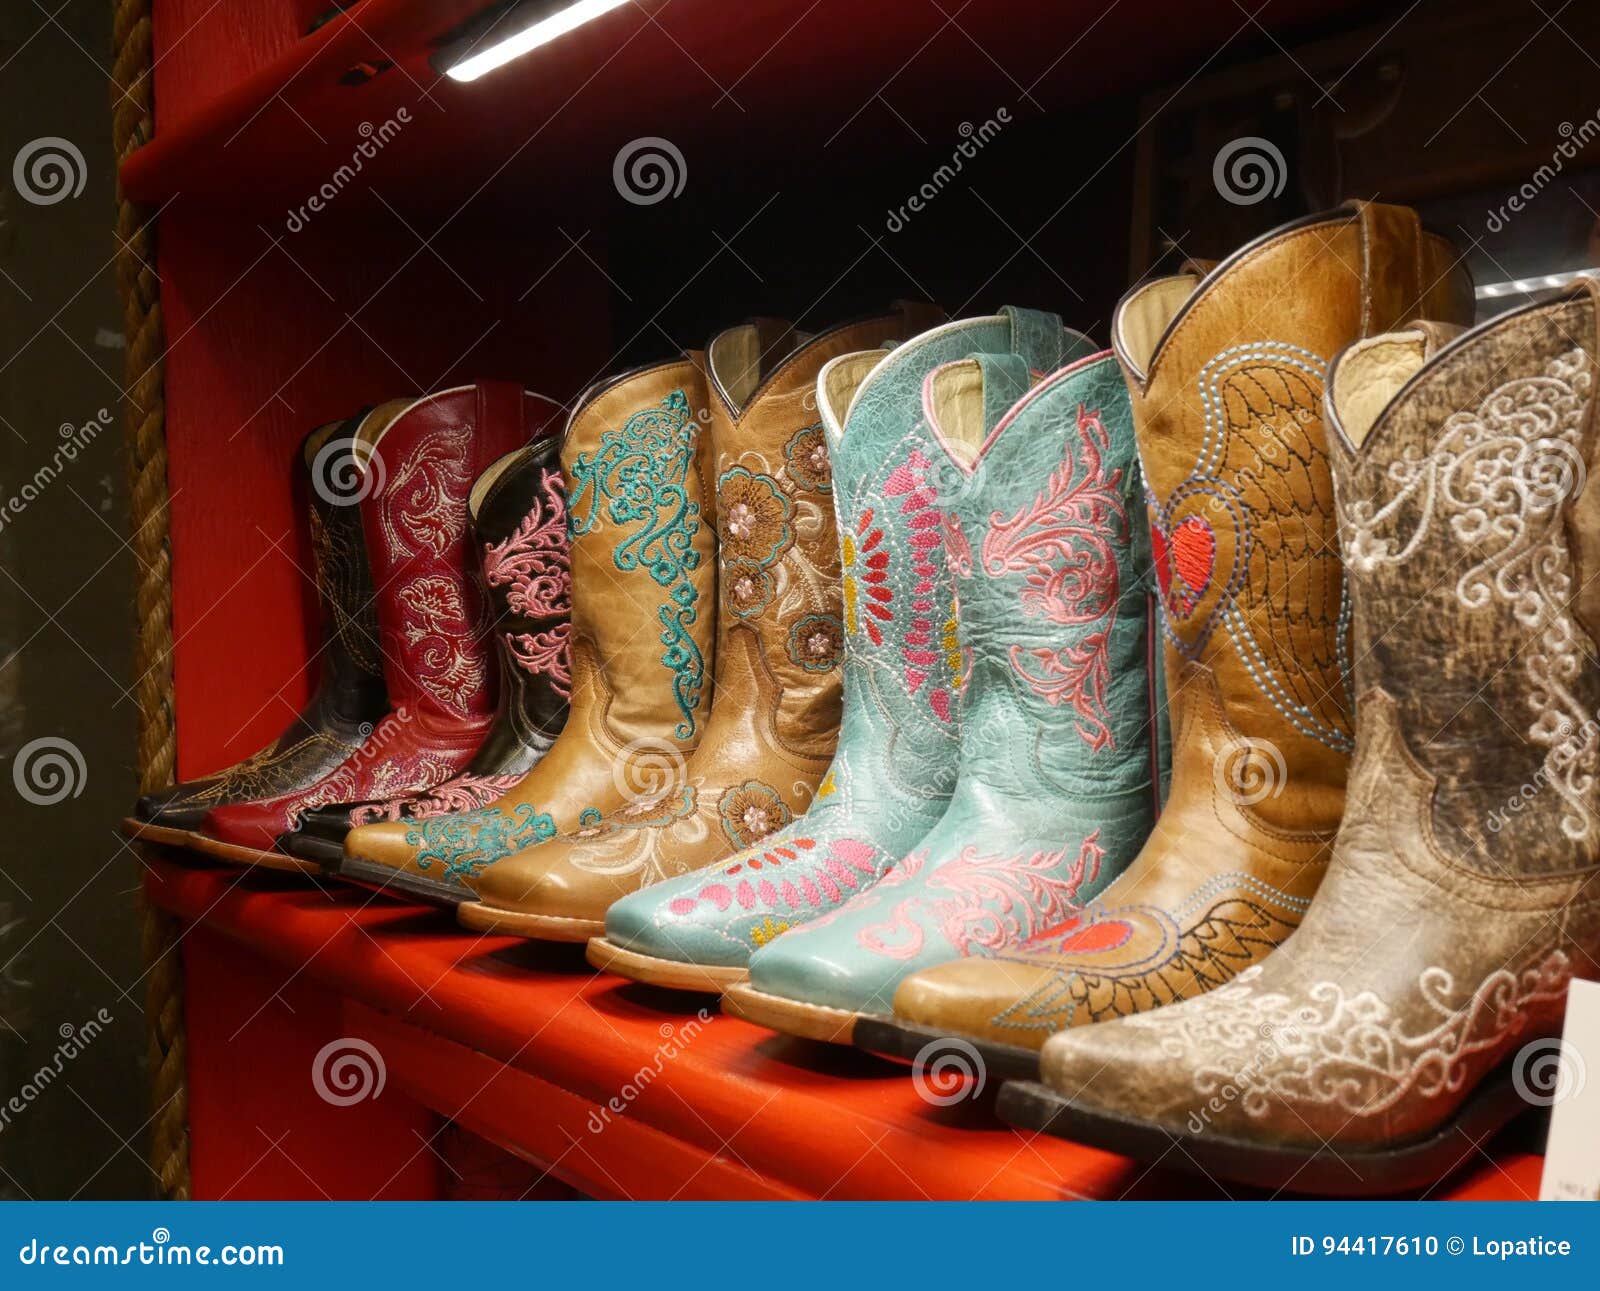 Kan beregnes Fruity service 1,177 Texas Boots Photos - Free & Royalty-Free Stock Photos from Dreamstime